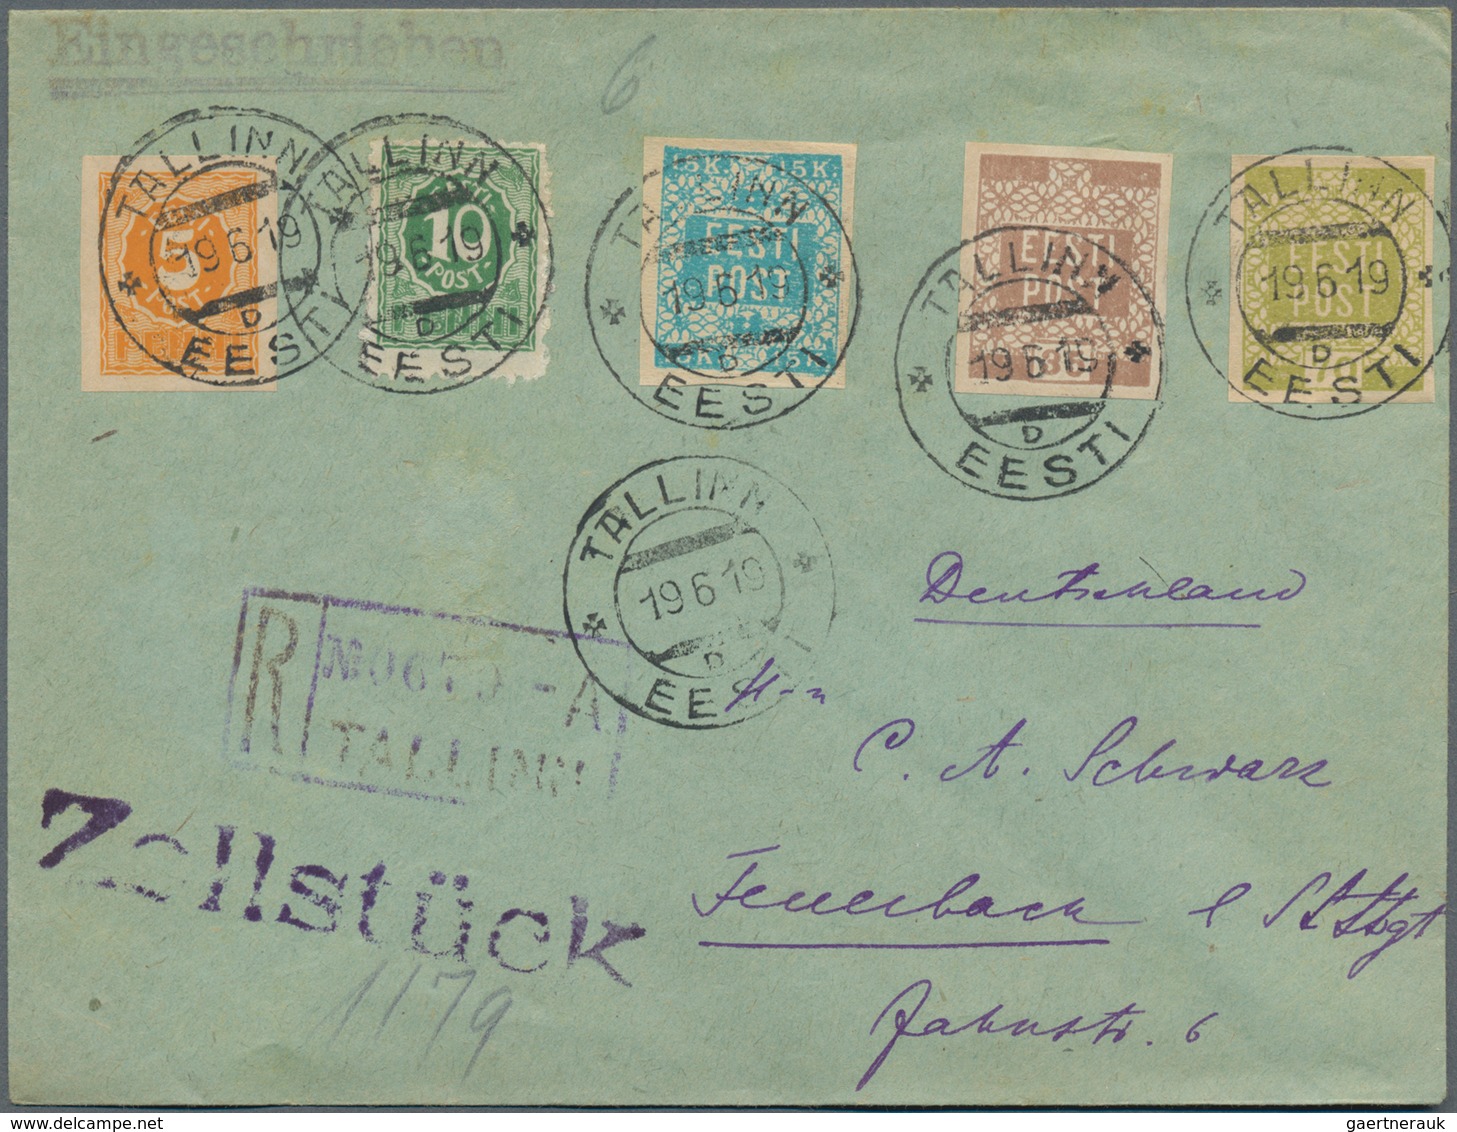 Sowjetunion: 1924/91 ca. 430 covers, cards, letters, postal stationary, while overprints, revaluatio